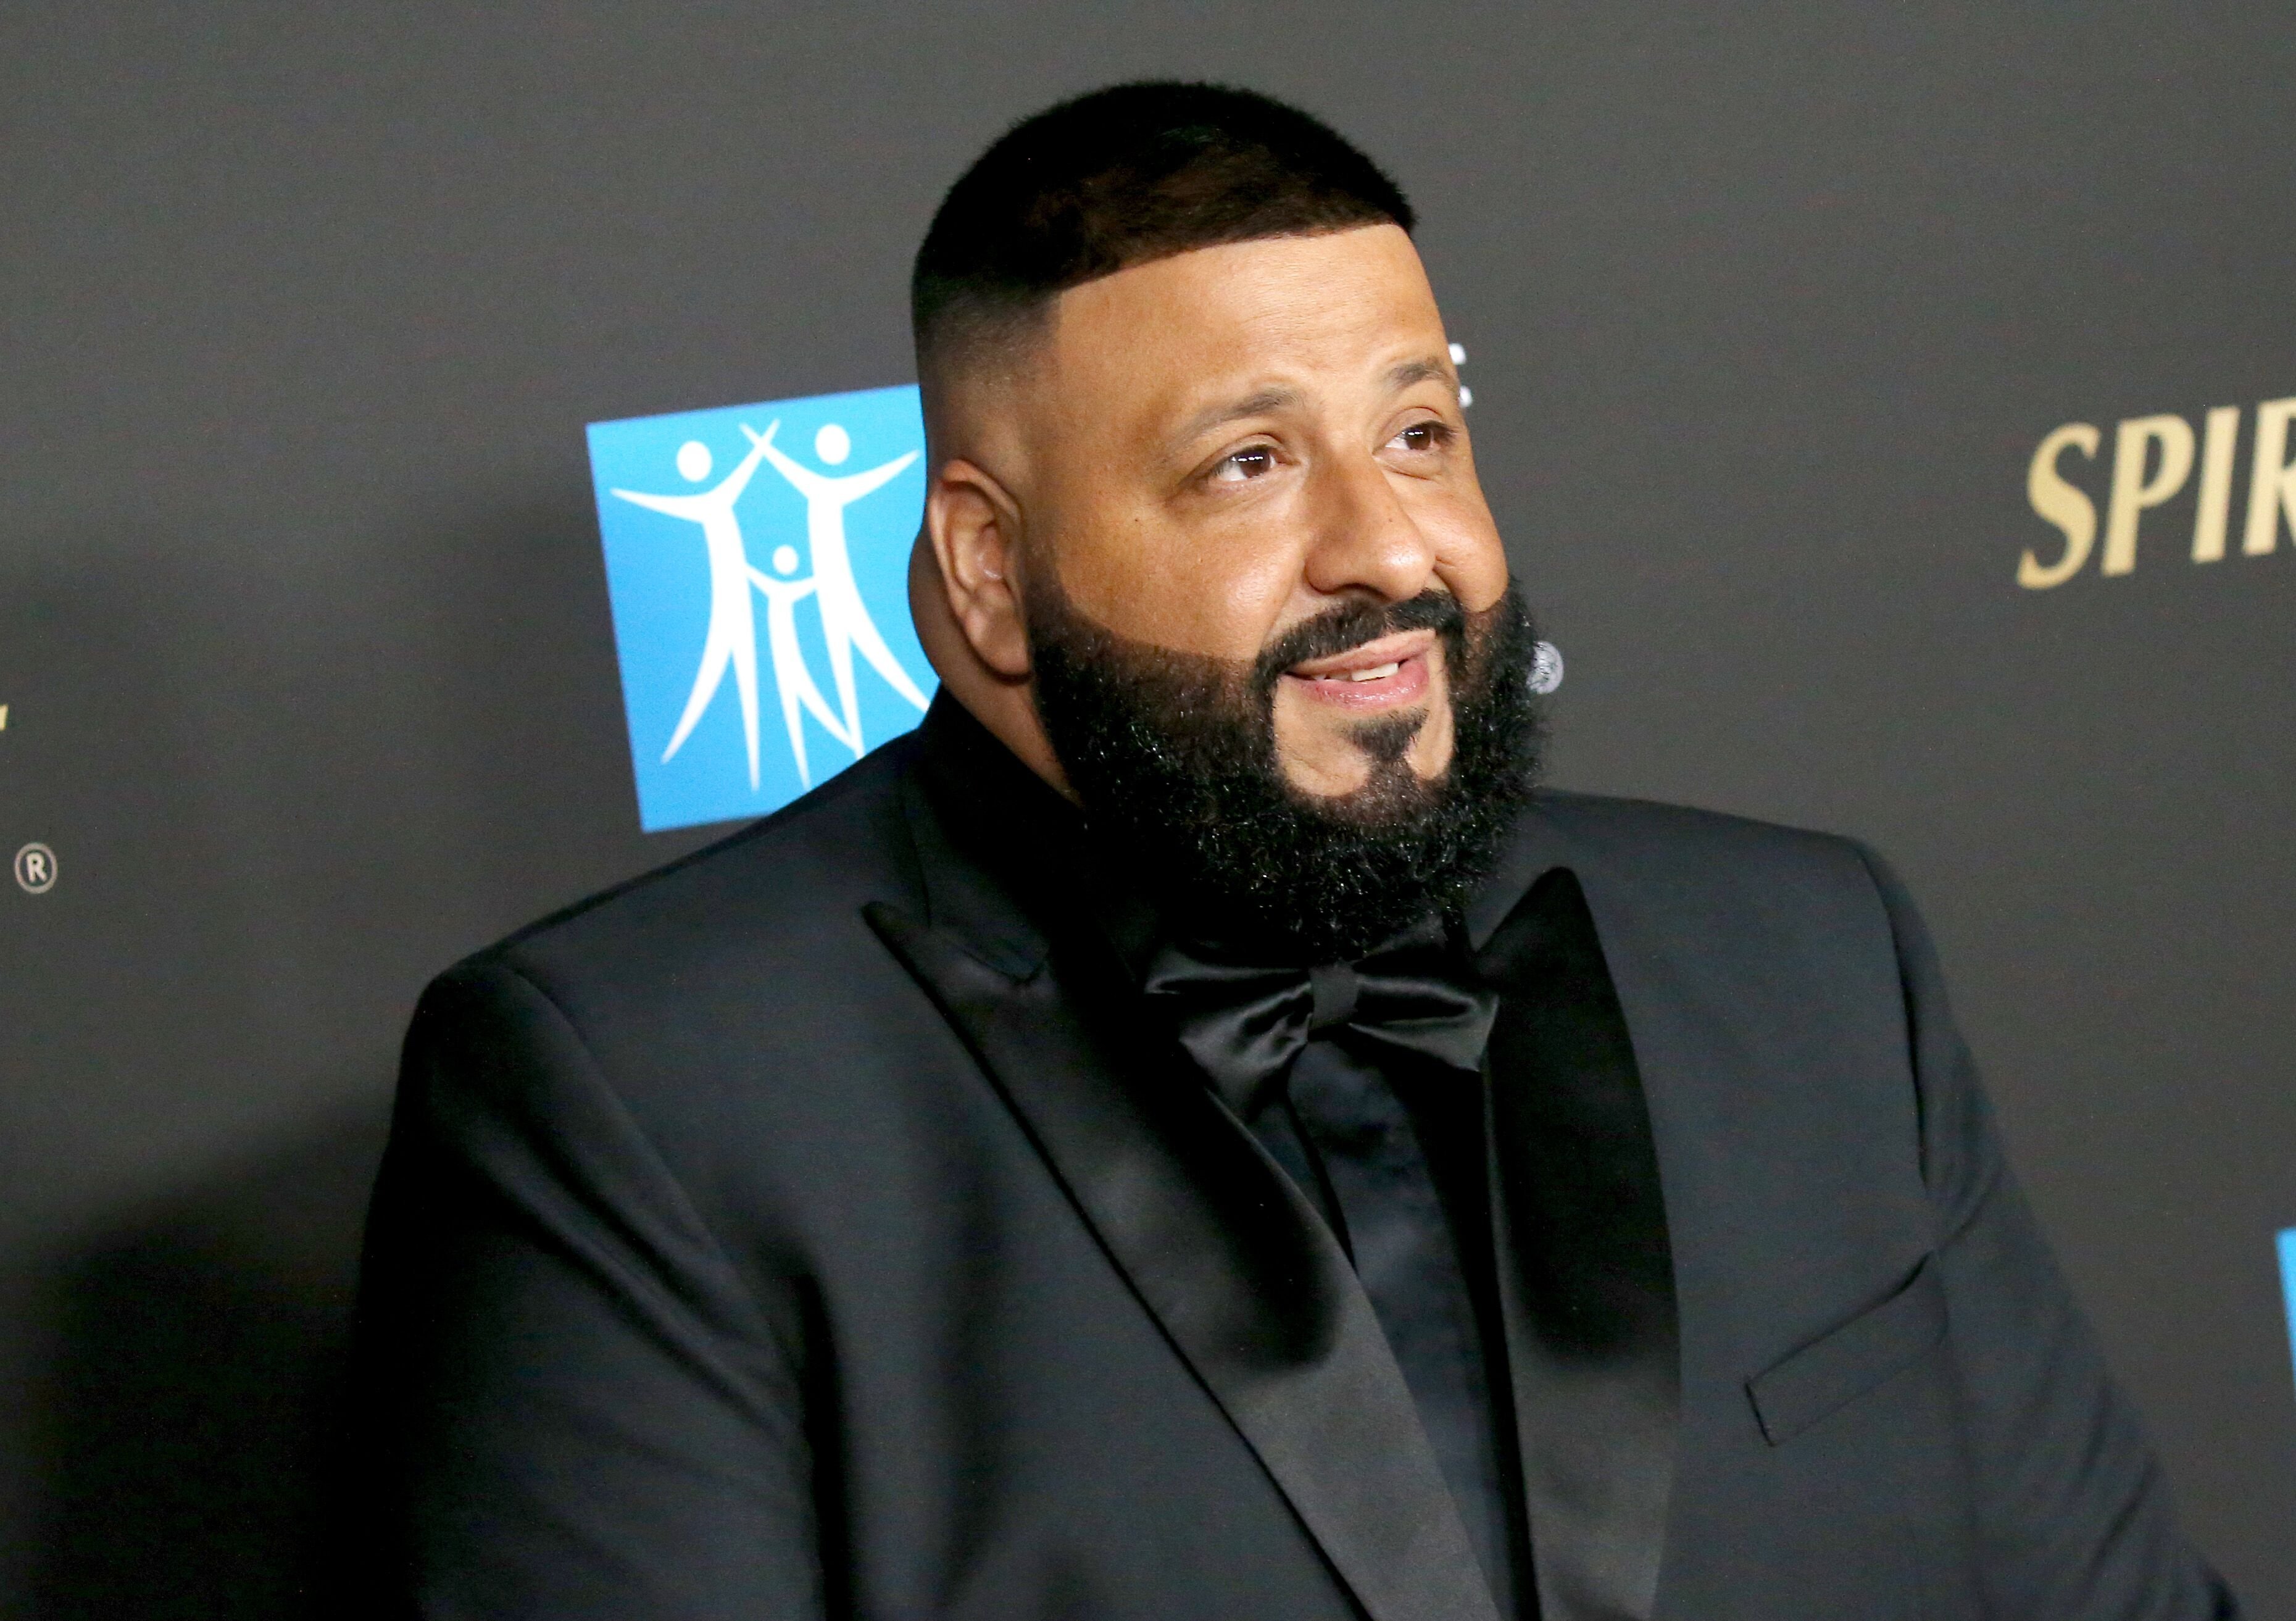 DJ Khaled attends the City Of Hope's Spirit of Life 2019 Gala held at The Barker Hanger on October 10, 2019. | Photo: Getty Images